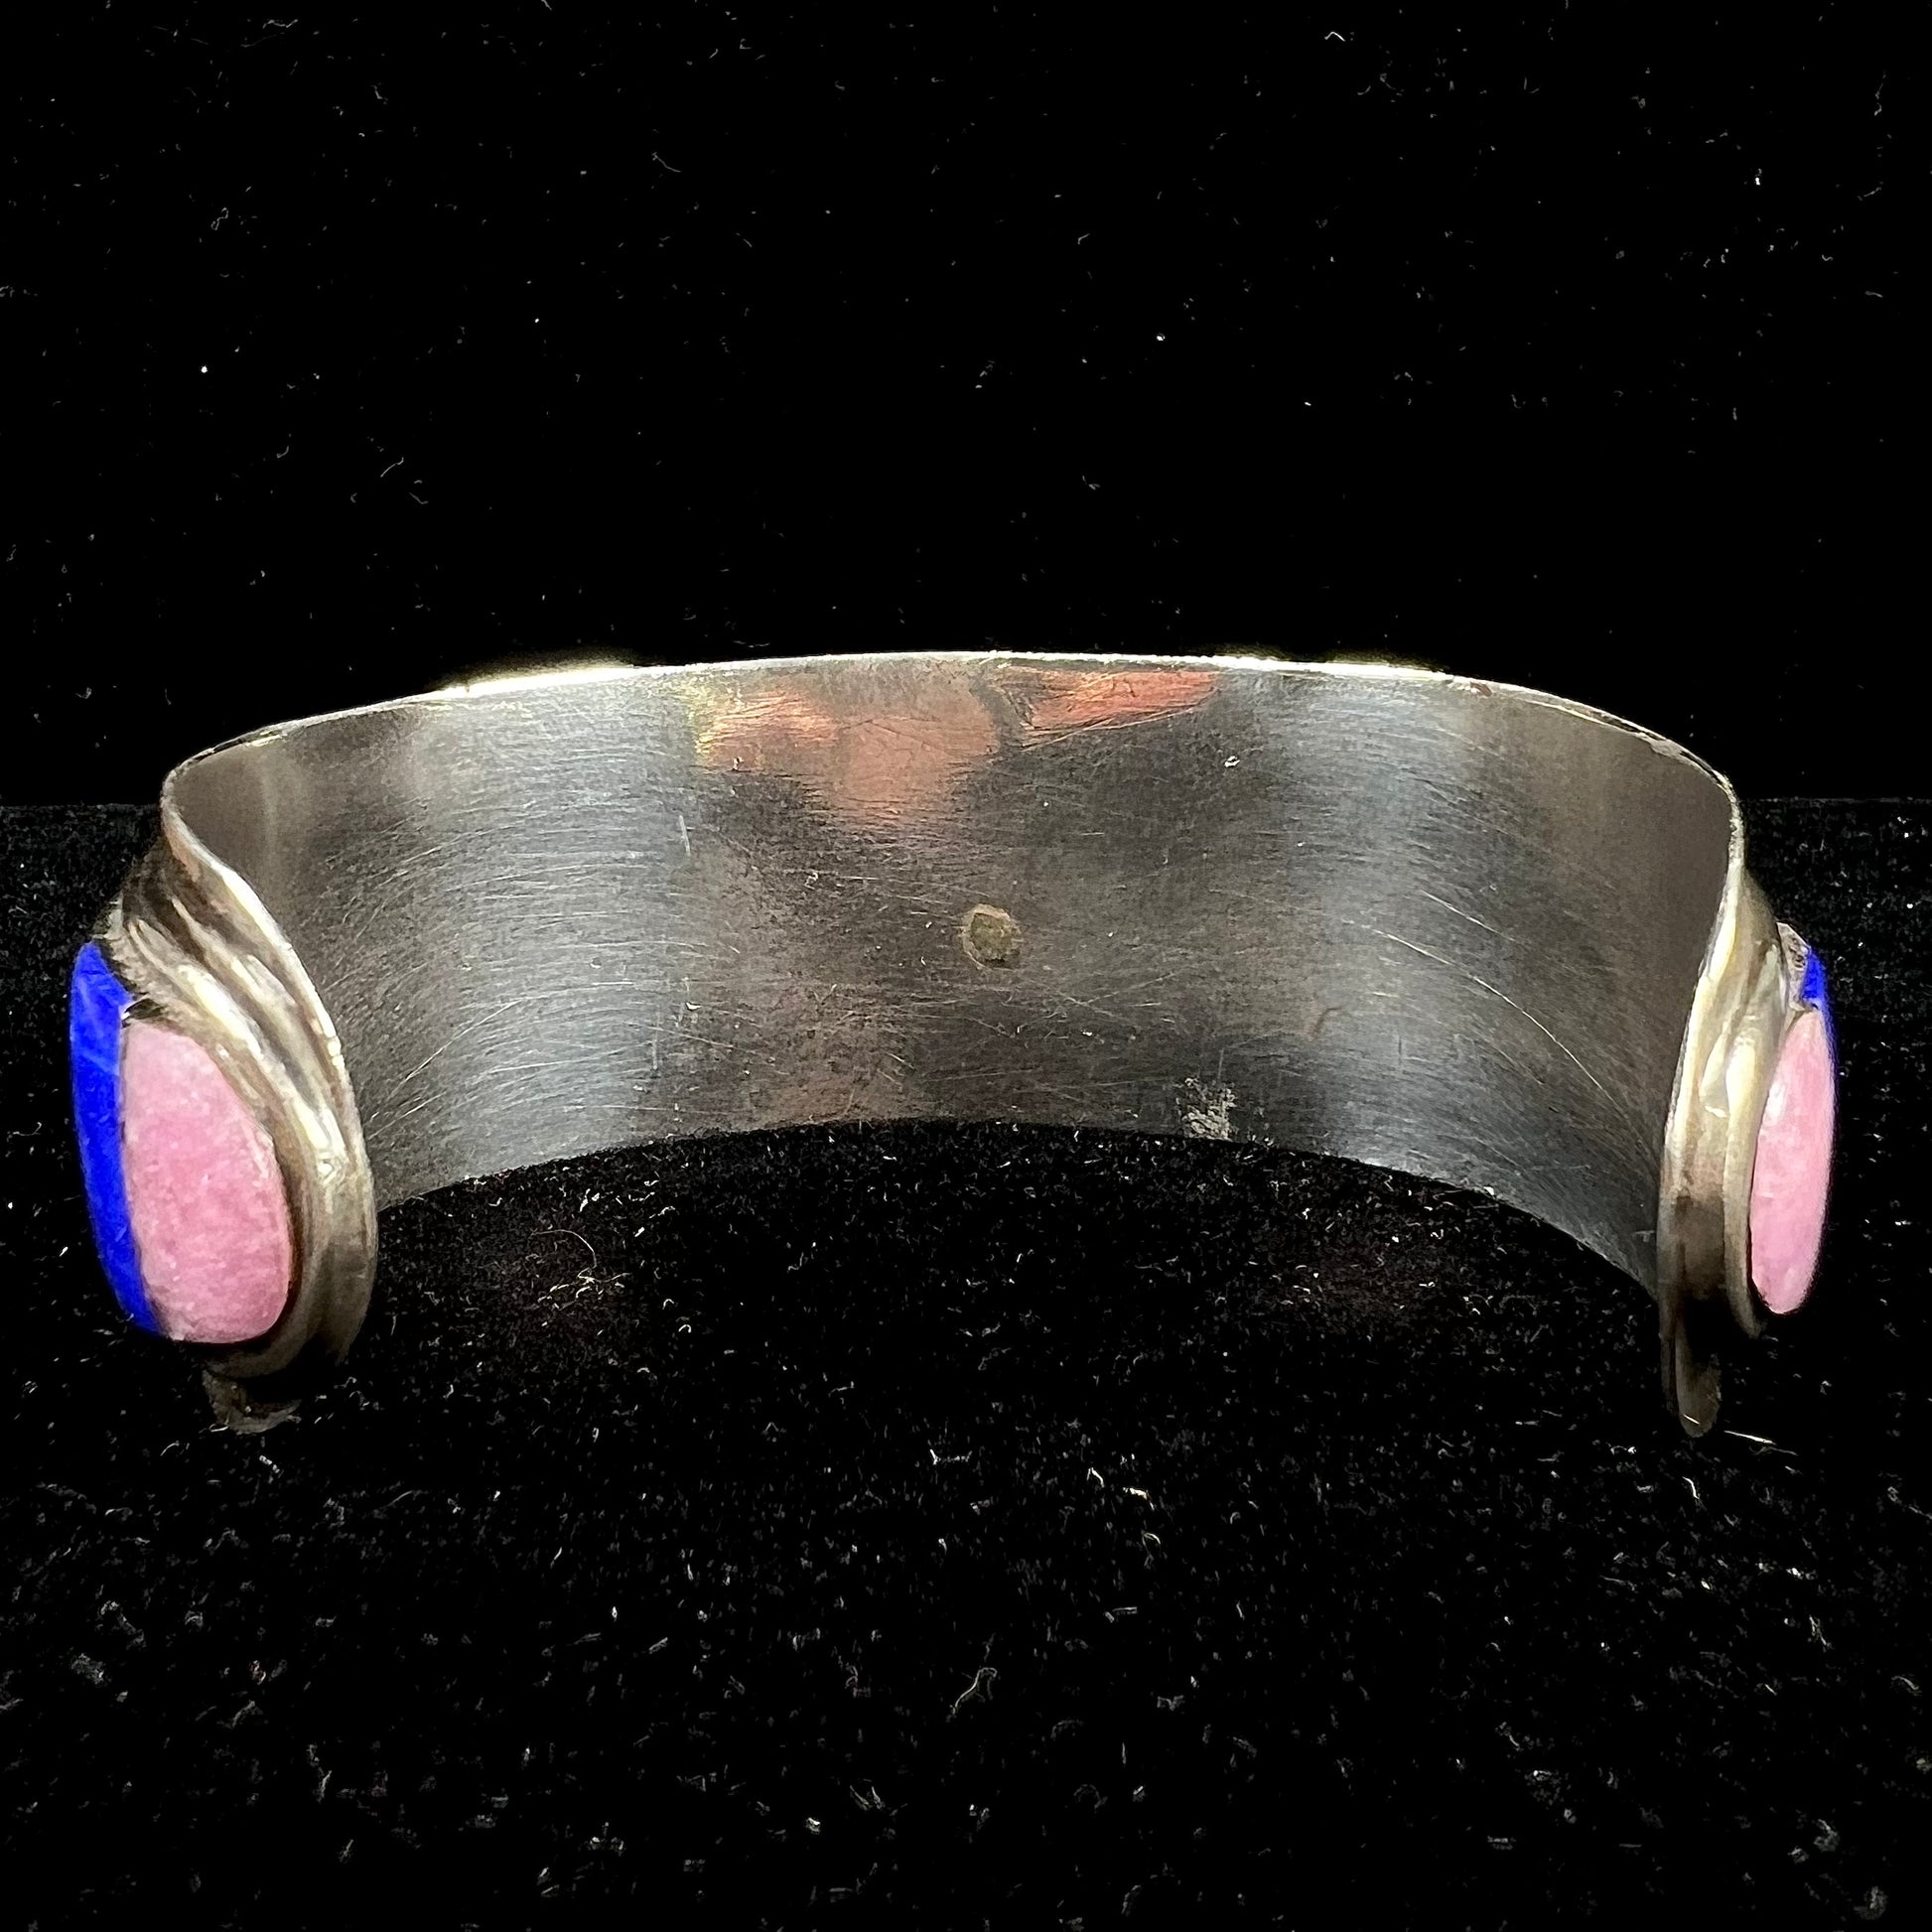 A men's vintage sterling silver Hopi Indian cuff bracelet set with tiger's eye, lapis lazuli, turquoise, jet, and rhodonite.